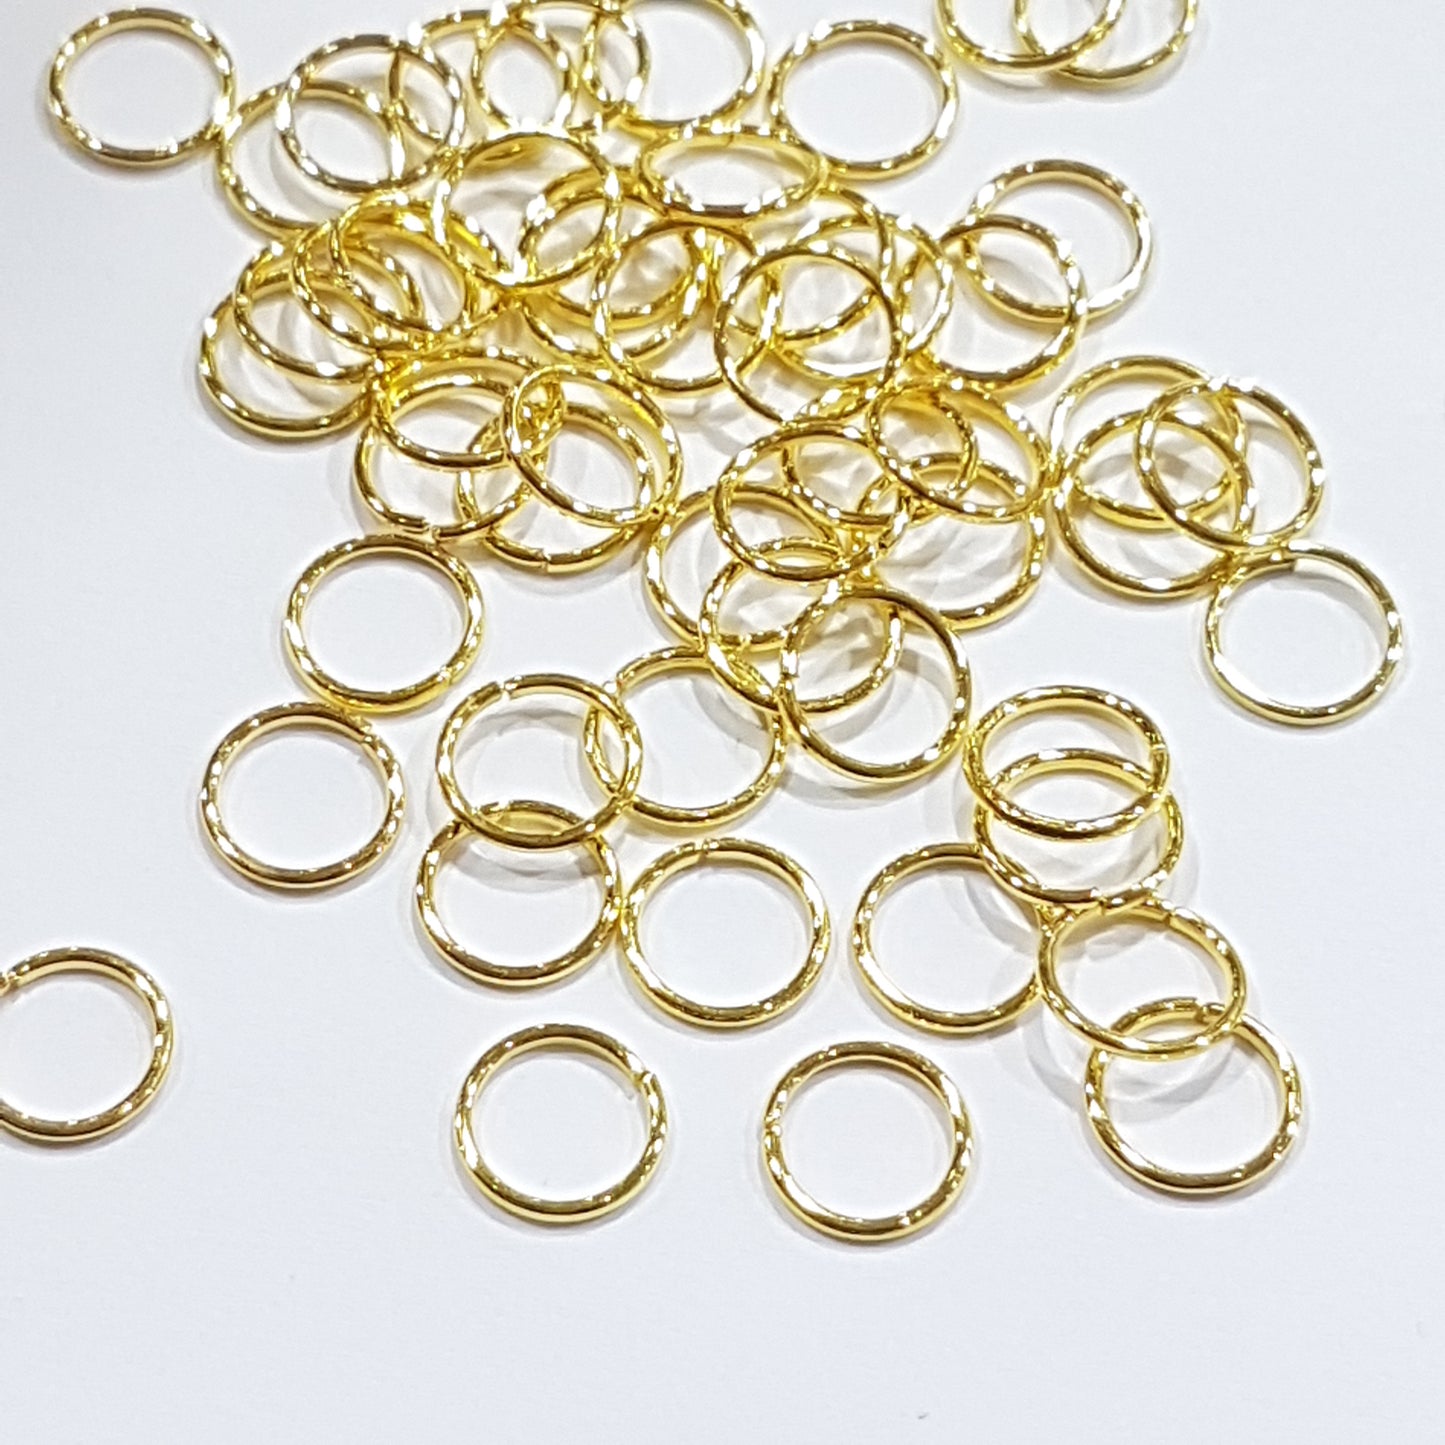 8mm Gold Jump Rings 100pc